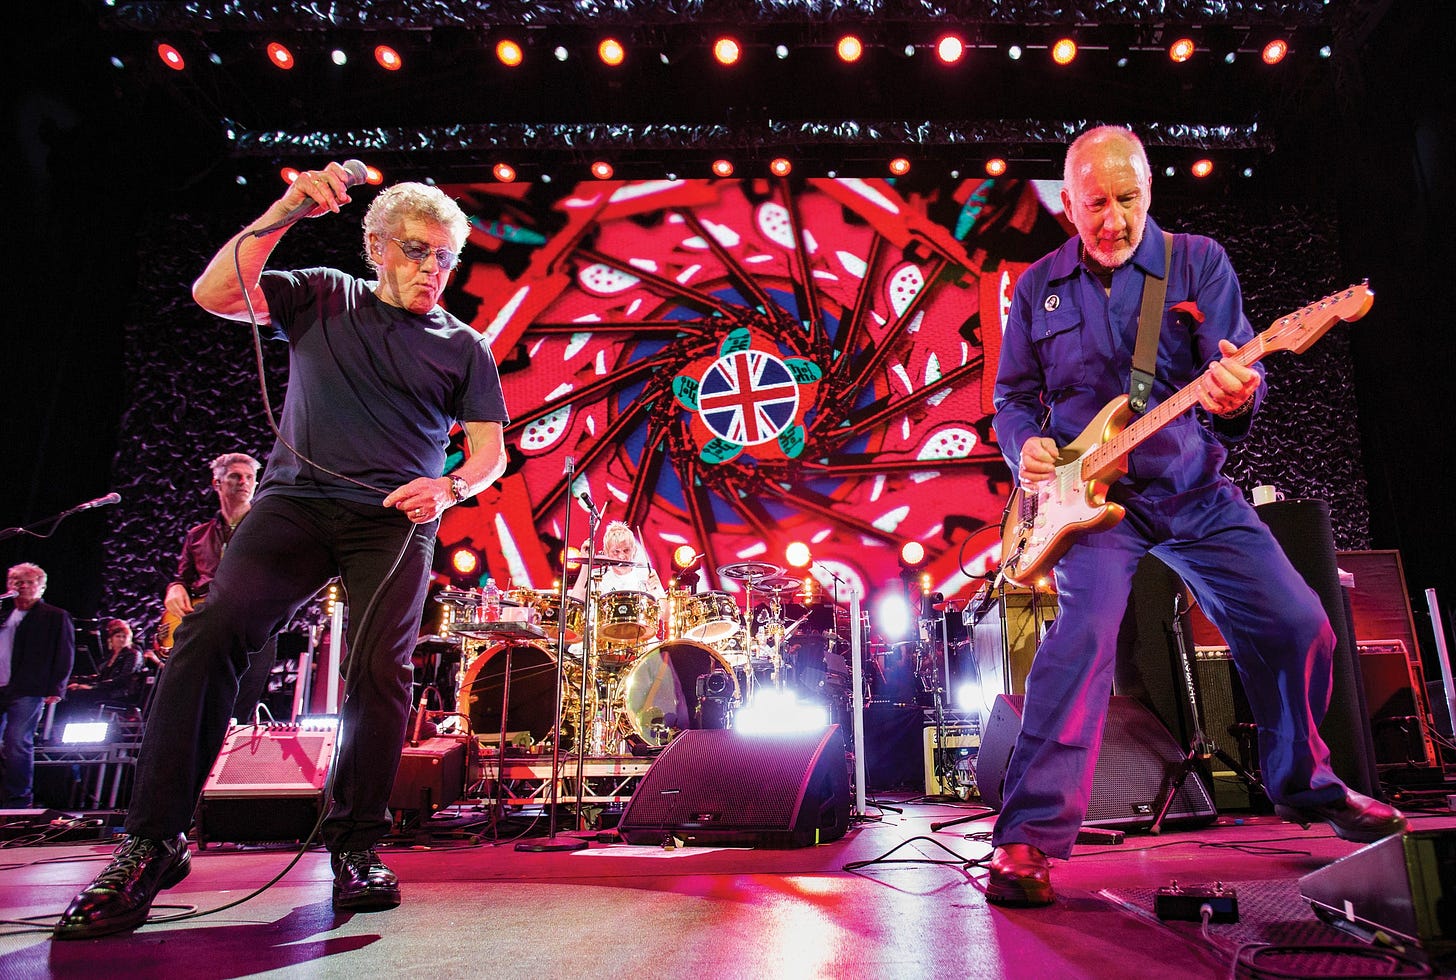 Roger Daltrey (left) and Pete Townshend front The Who, who played Wembley Stadium in 2019 with a 50-piece orchestra. The resulting "The Who with Orchestra Live at Wembley" was released March 21, 2023.